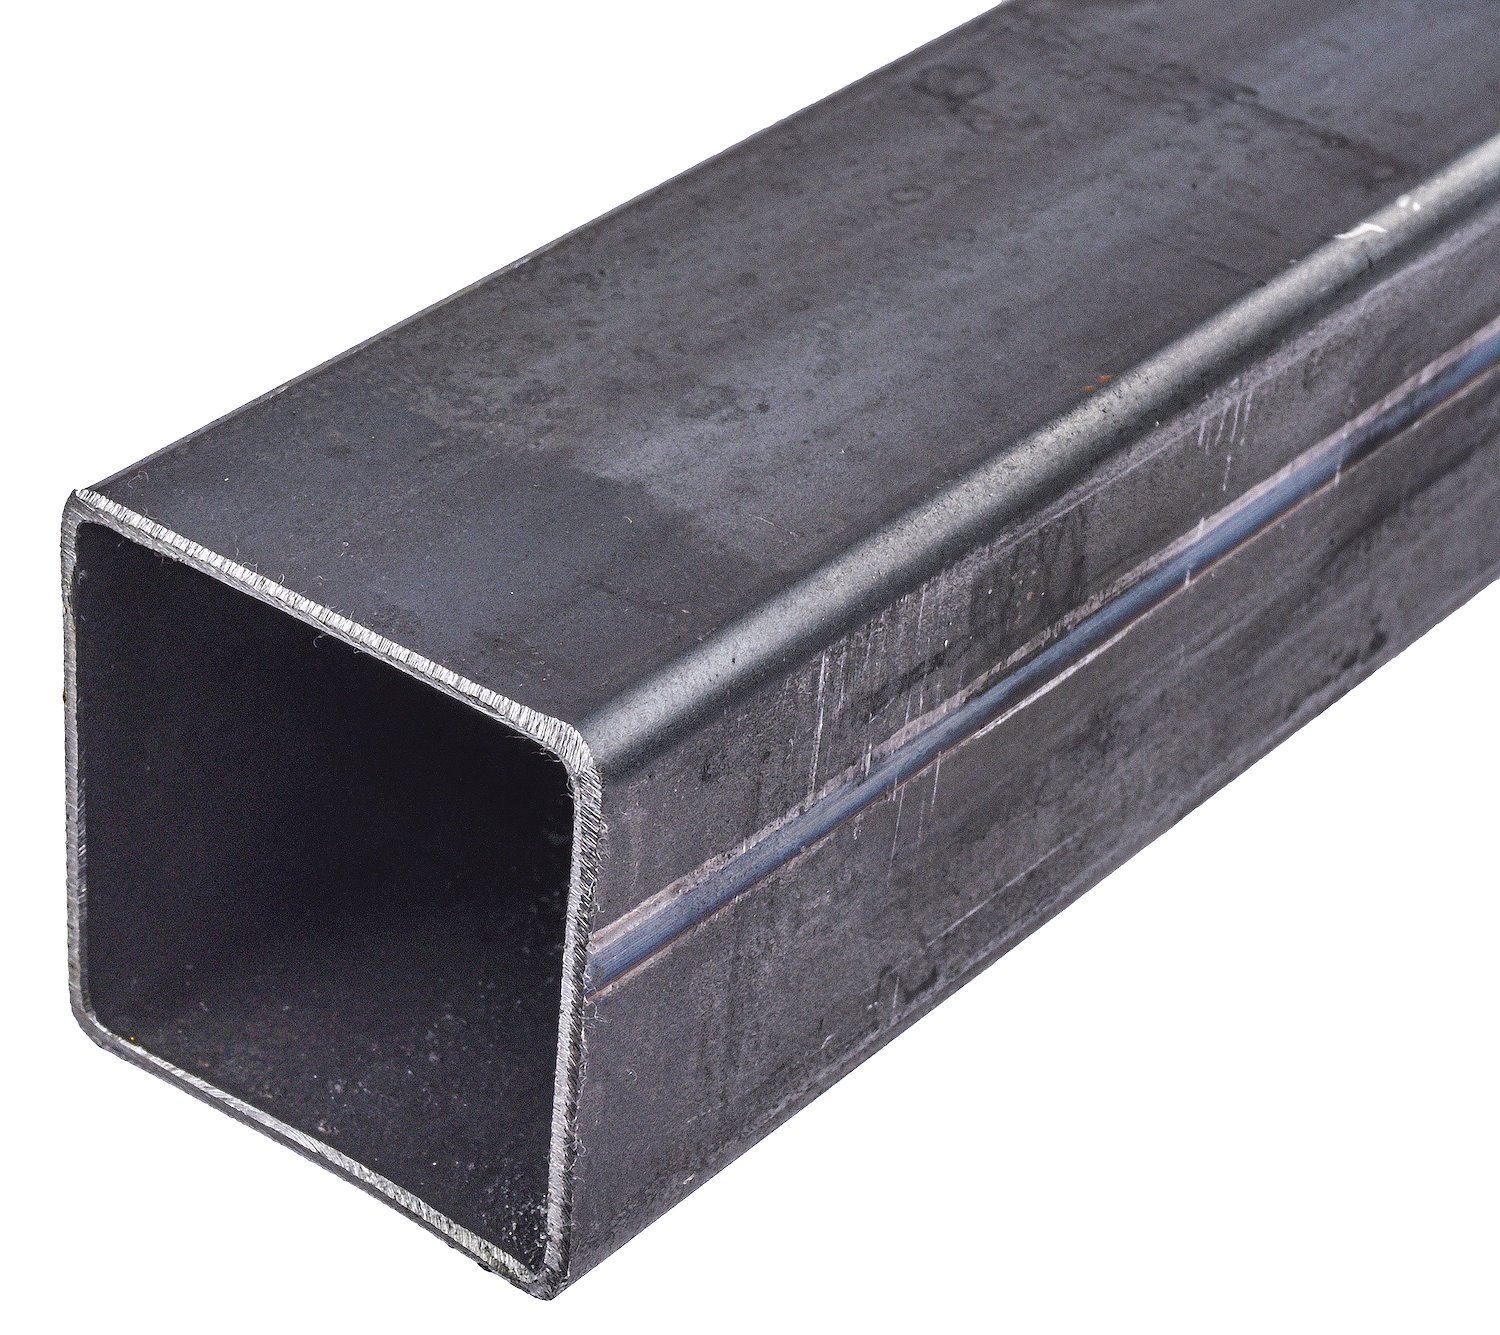 8 foot Square Steel Tubing (2 Inch Width x .083 Thickness)